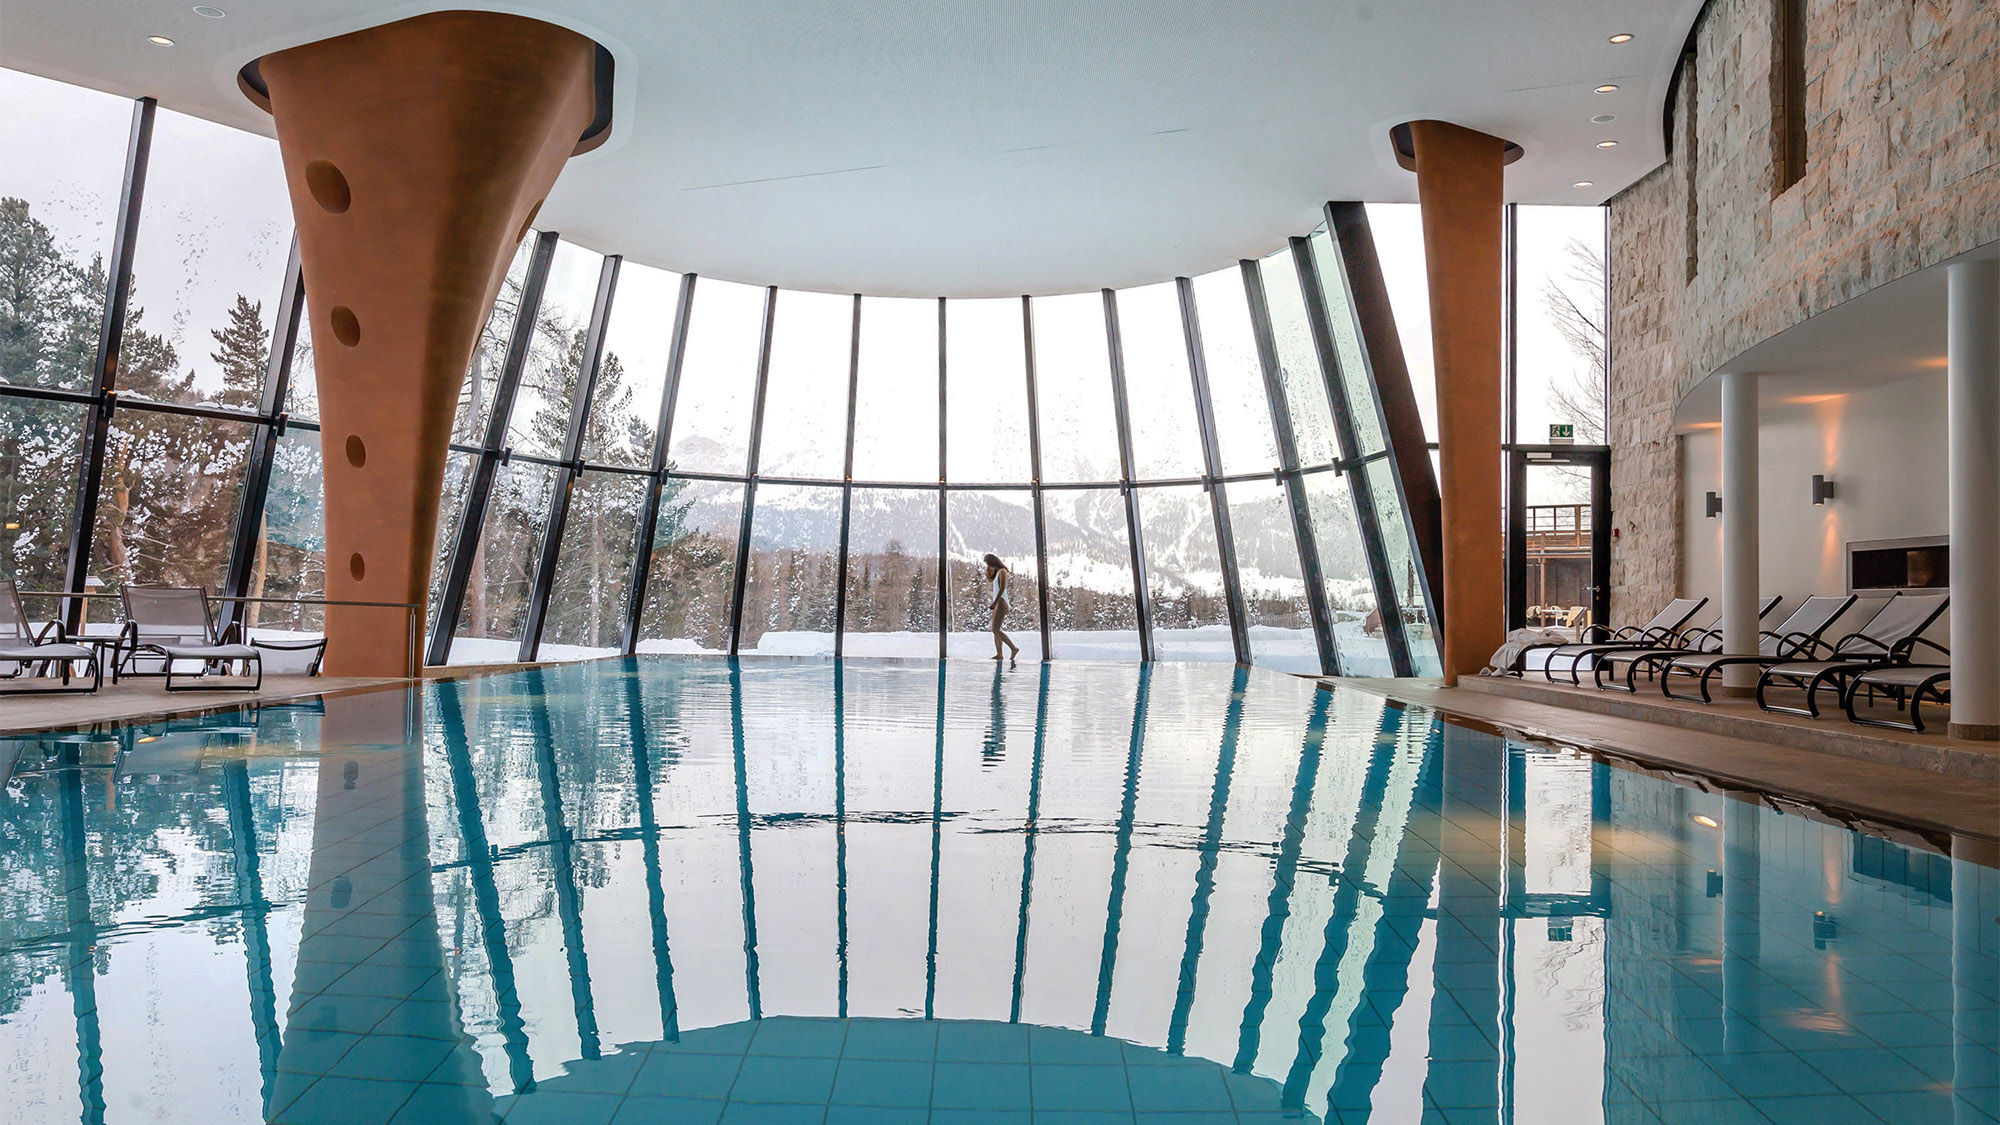 The Wellness Pool at the Grand Hotel Kronenhof, part of the hotel's expansive spa that also features saunas, a saltwater grotto and a stone cavern steam bath.